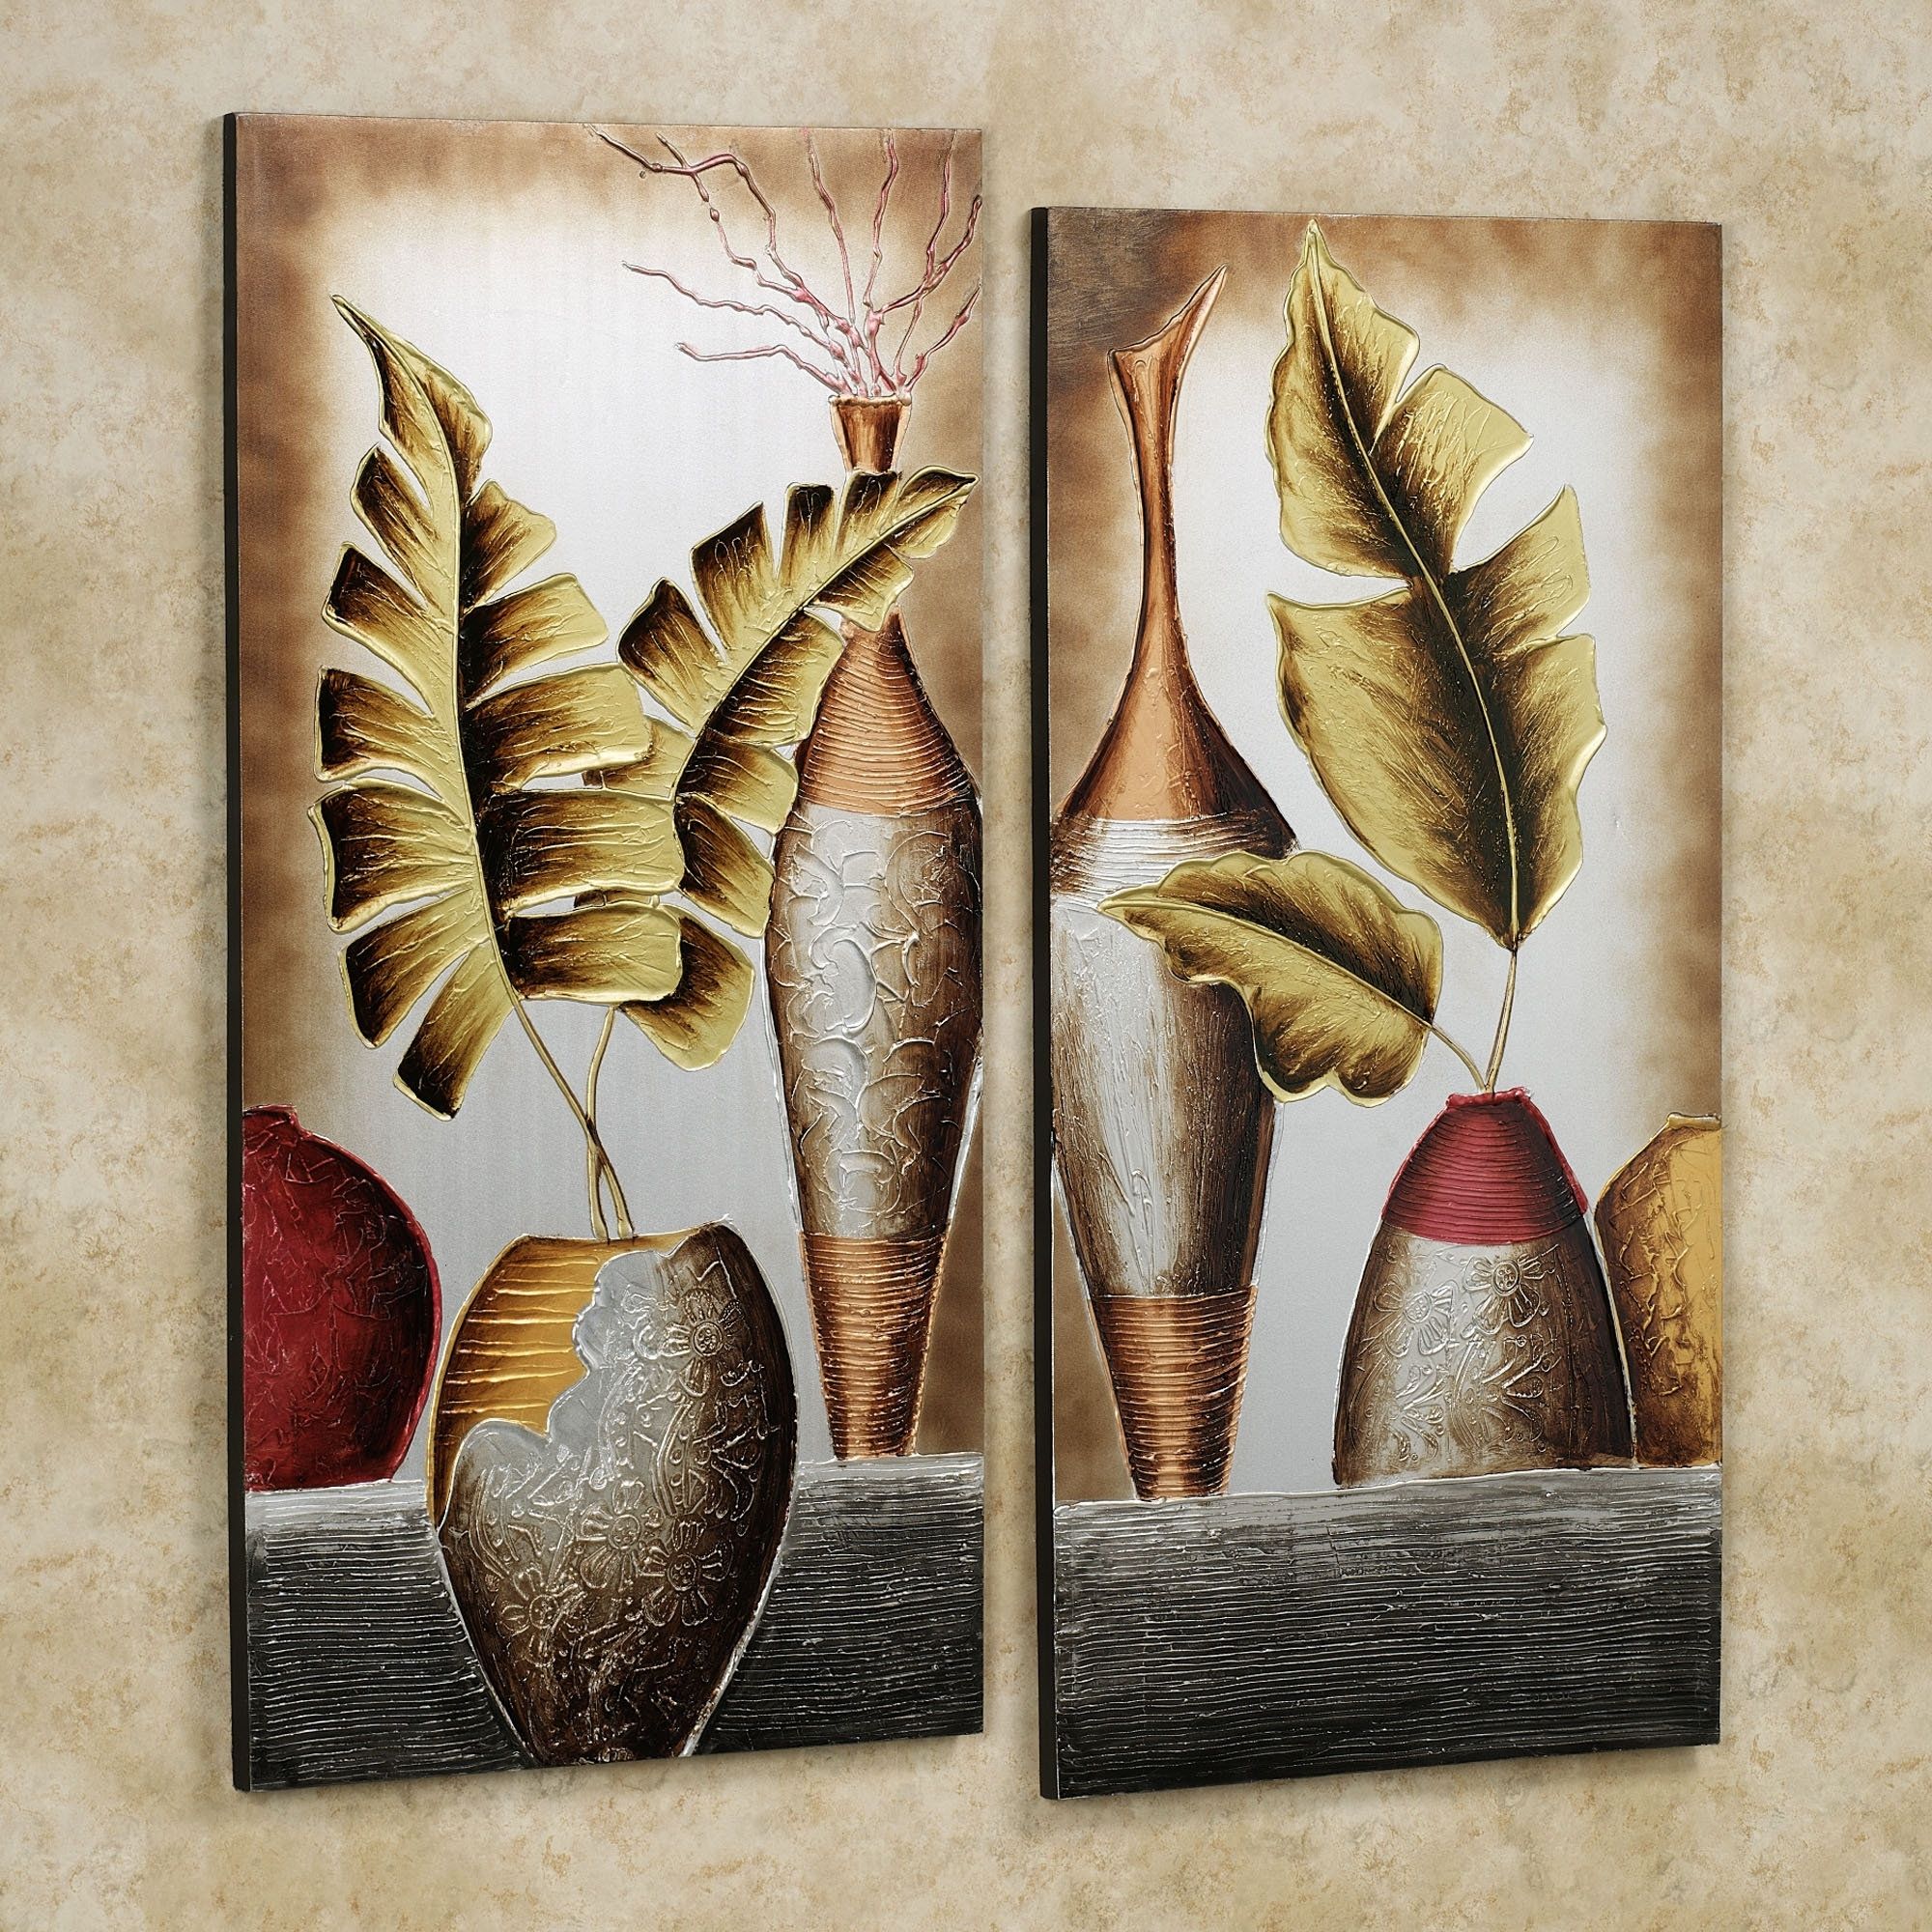 Wall Art Designs: Canvas Wall Art Sets Canvas Wall Art Set Unique Pertaining To Best And Newest Rectangular Canvas Wall Art (View 2 of 15)